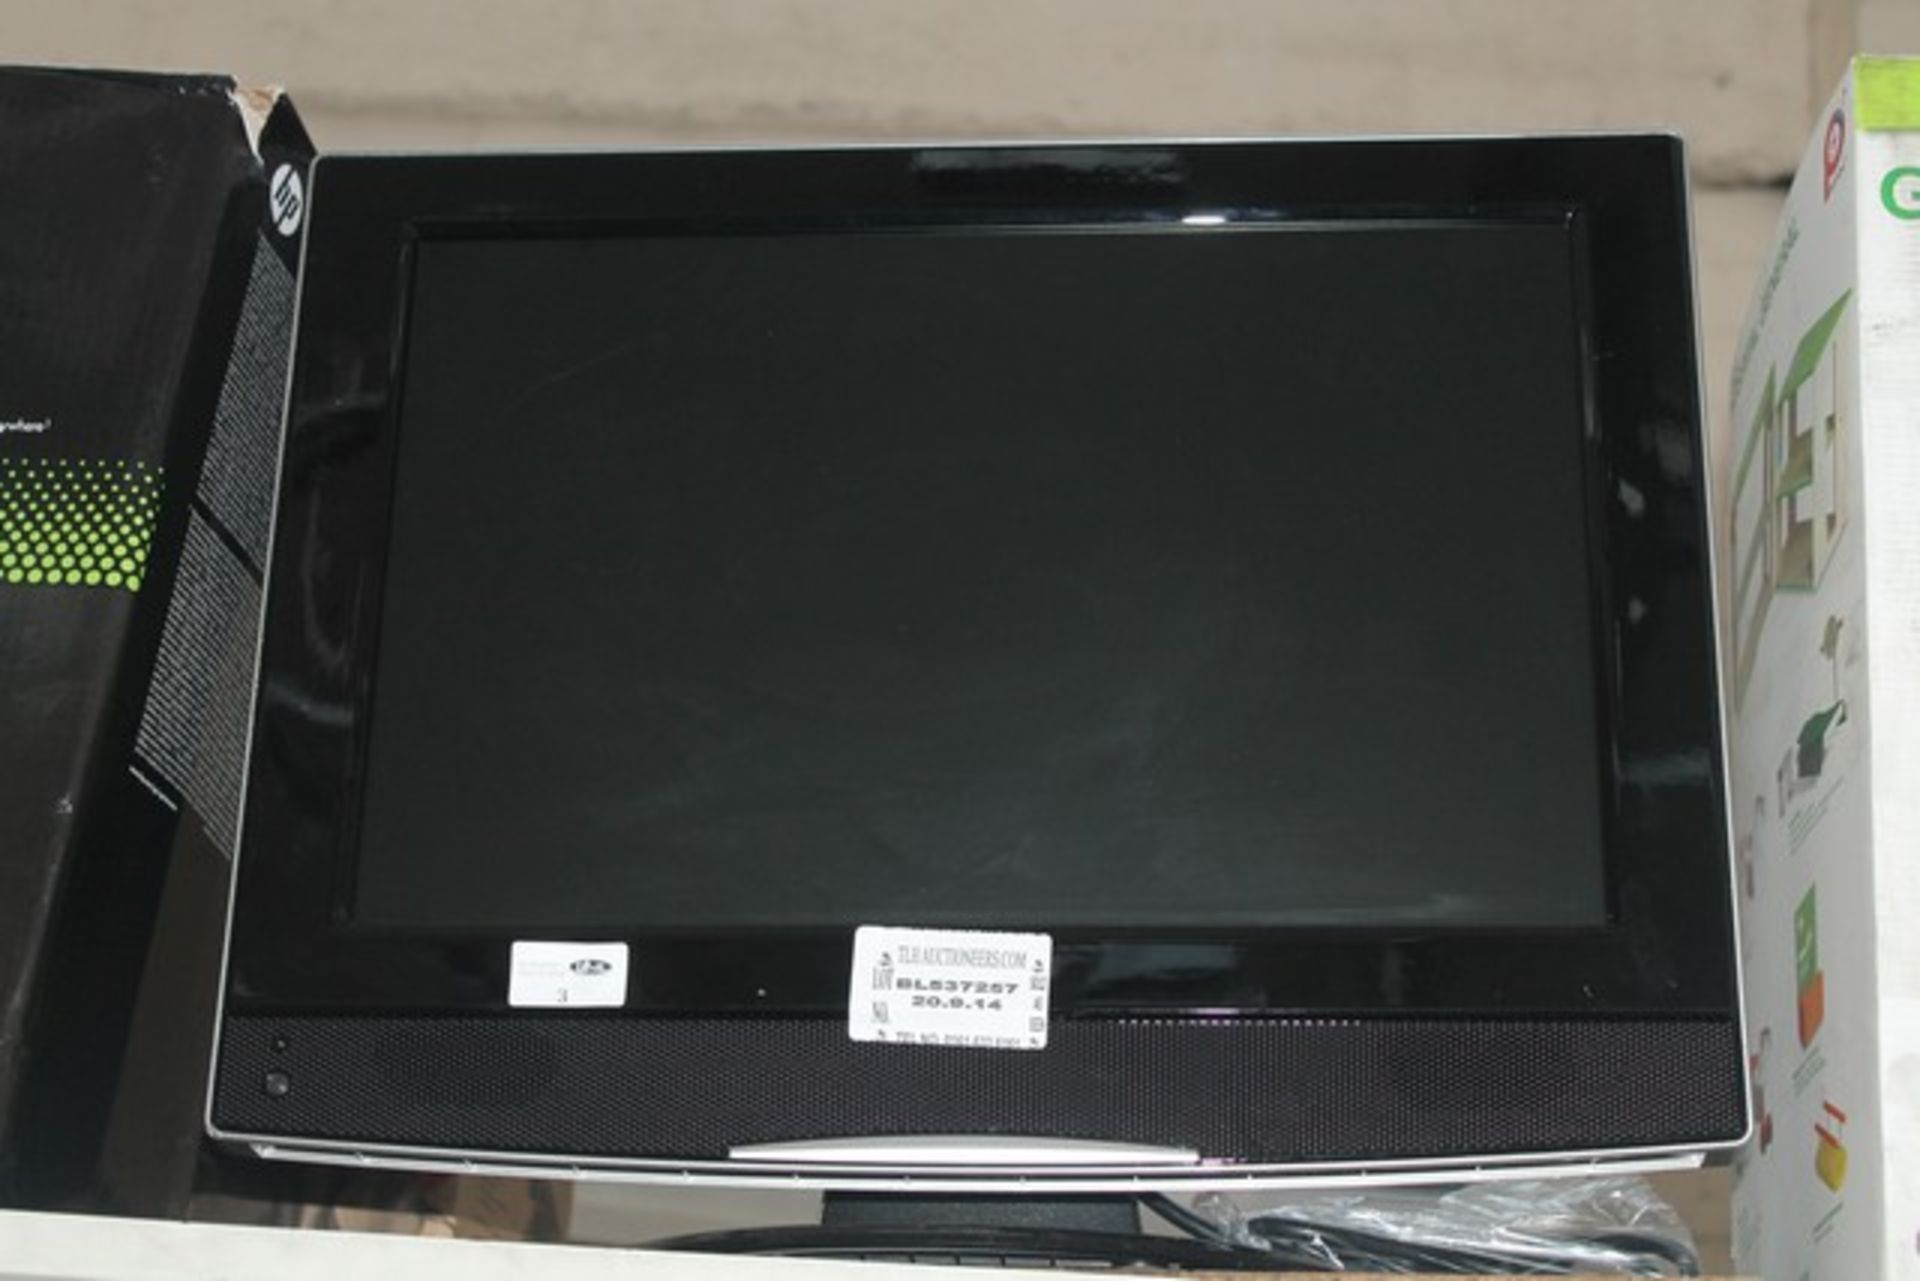 1 x 19INCH HD READY LCD TV WITH BUILT IN FREE VIEW (537257)  *Please note that the bid price is